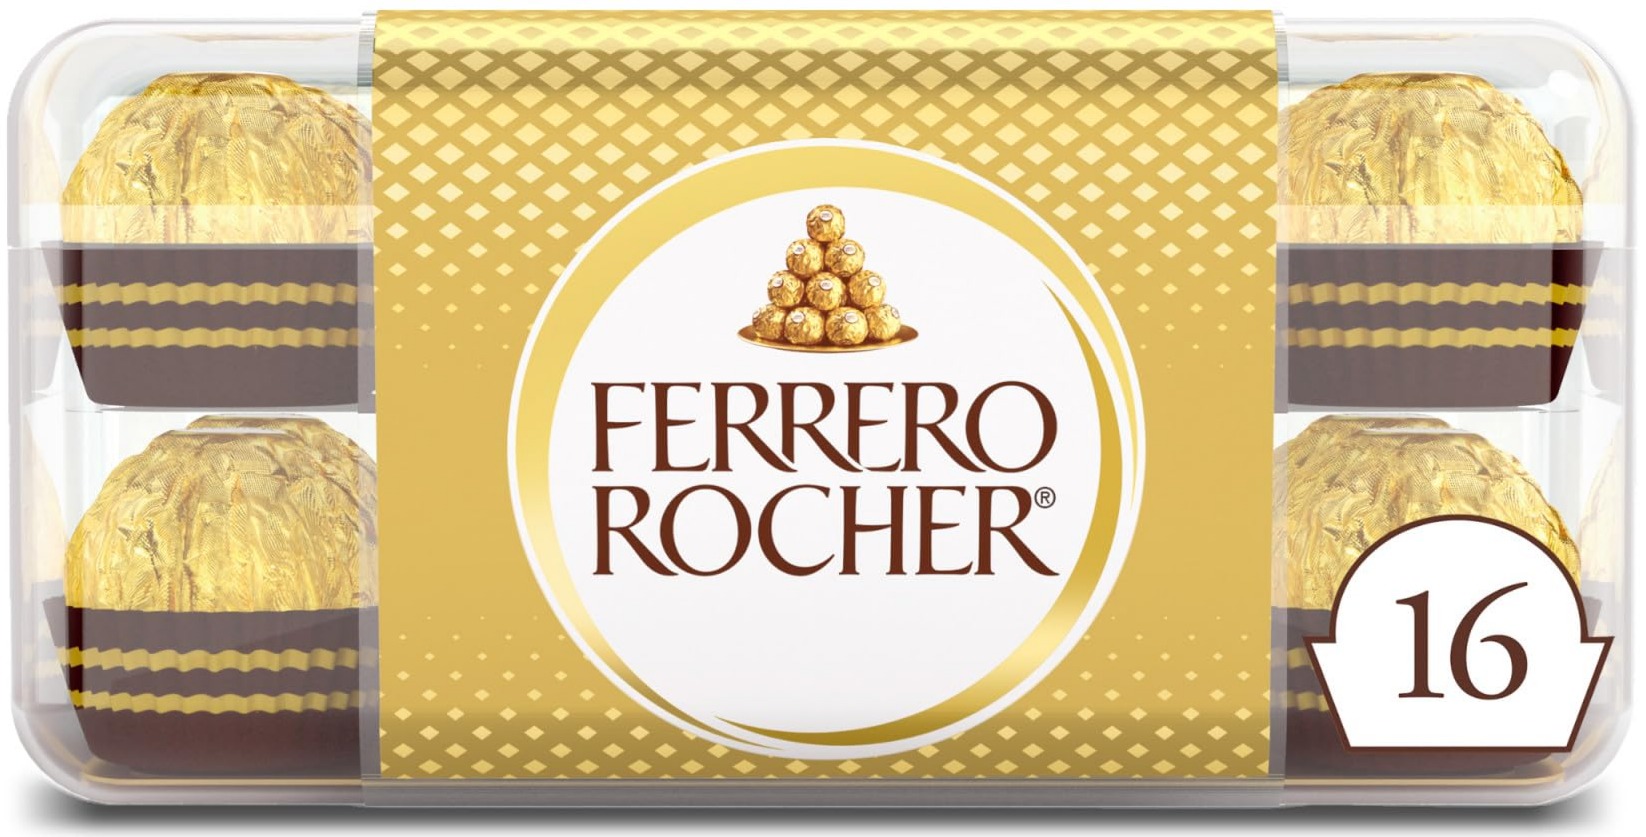 Ferrero Rocher, 16 Count, Premium Gourmet Milk Chocolate Hazelnut, Individually Wrapped Candy for Gifting, Mothers Day G